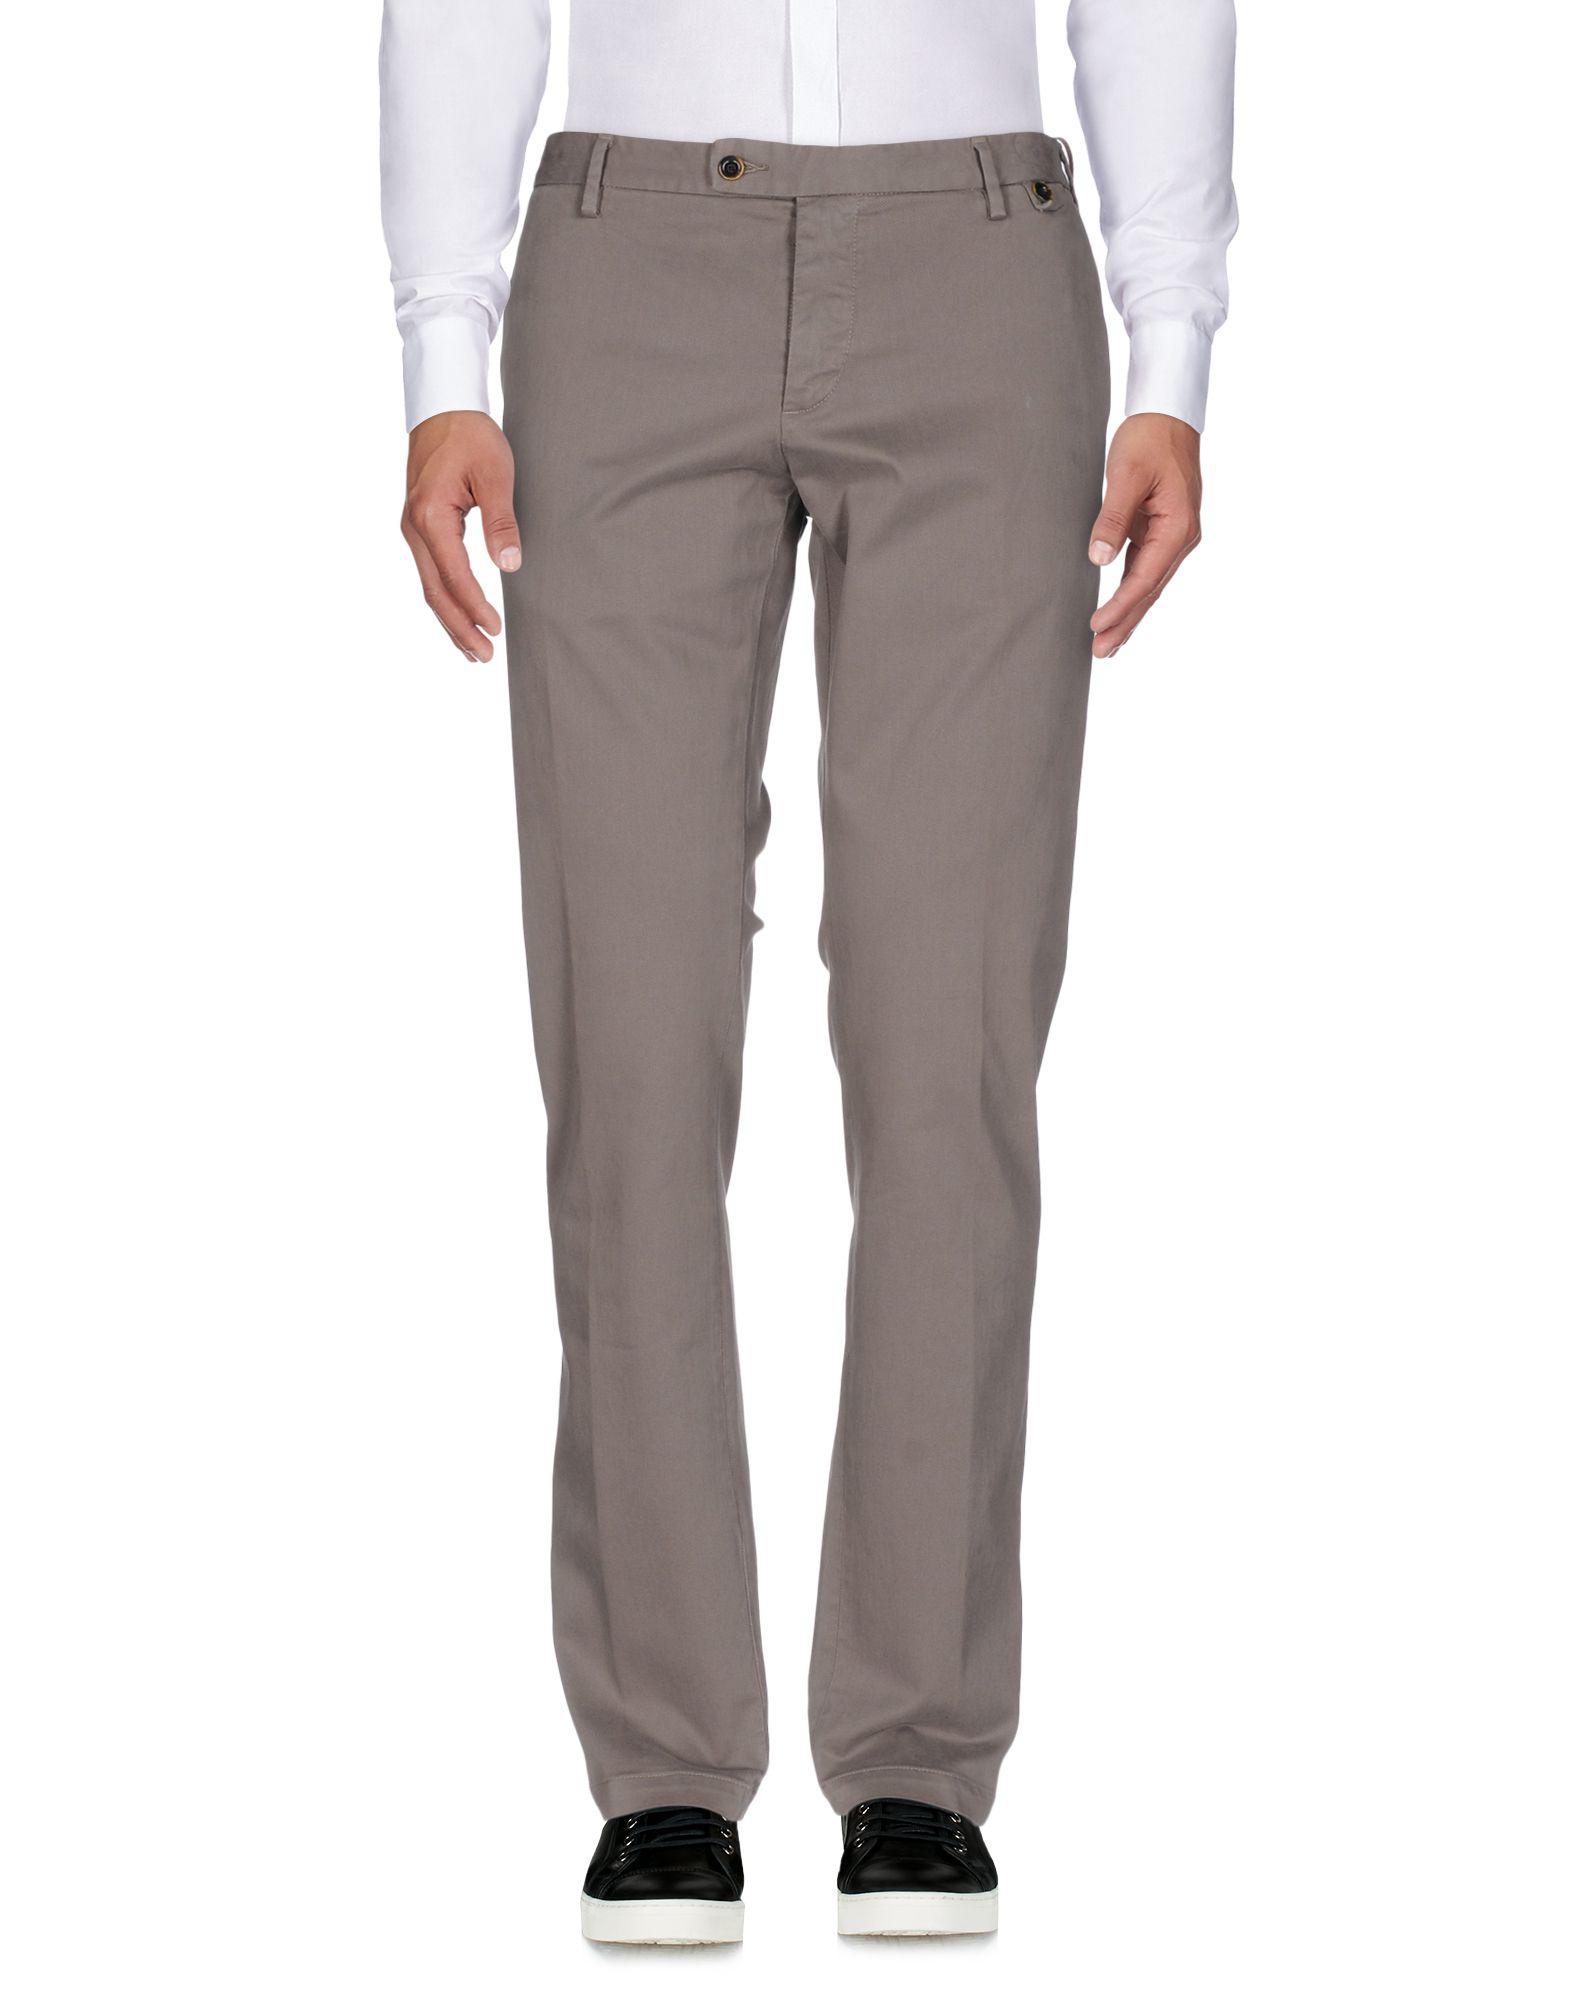 AT.P.CO Cotton Casual Pants in Light Grey (Gray) for Men - Lyst